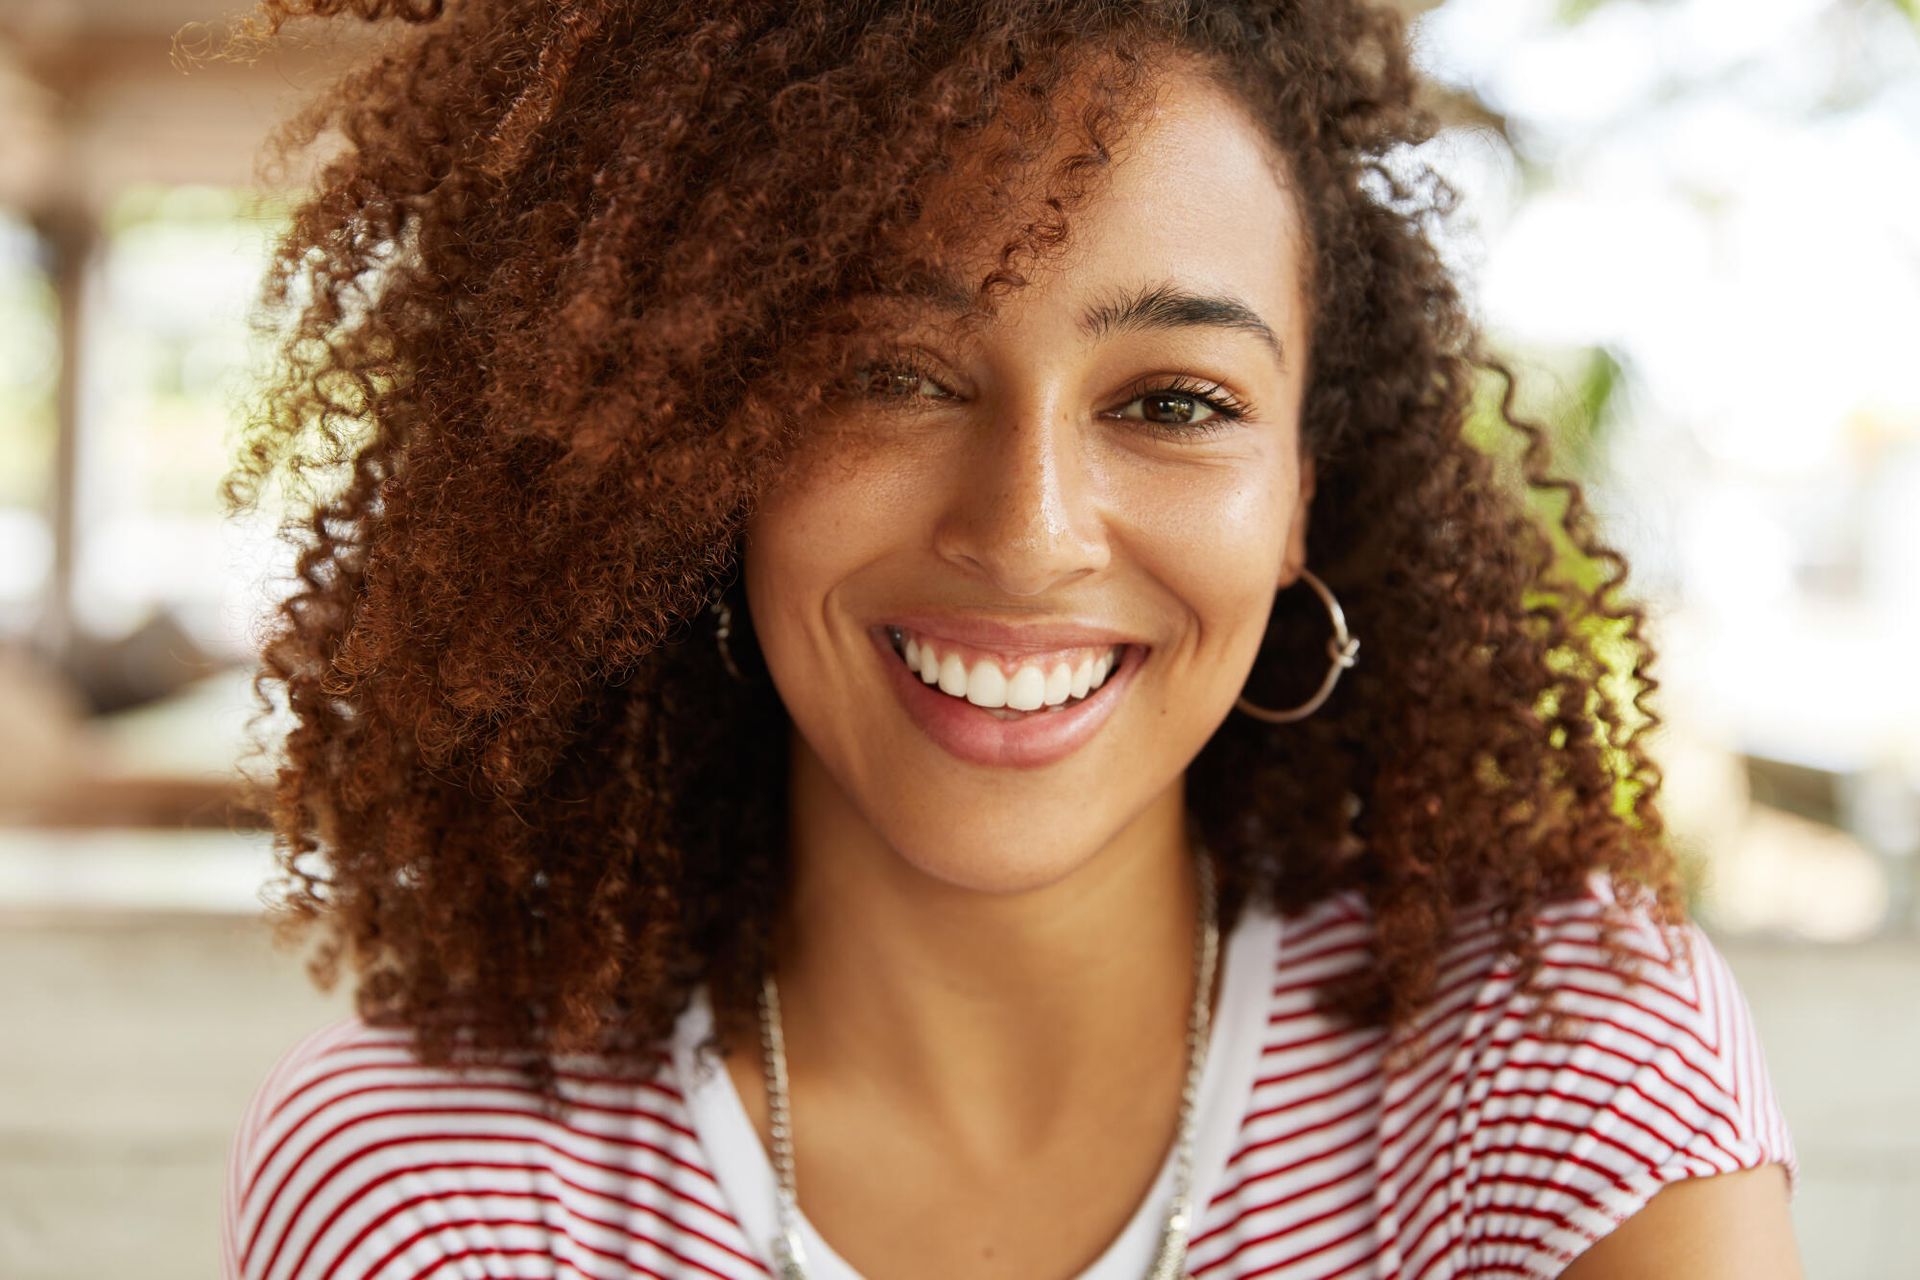 a woman with curly hair and hoop earrings is smiling for the camera